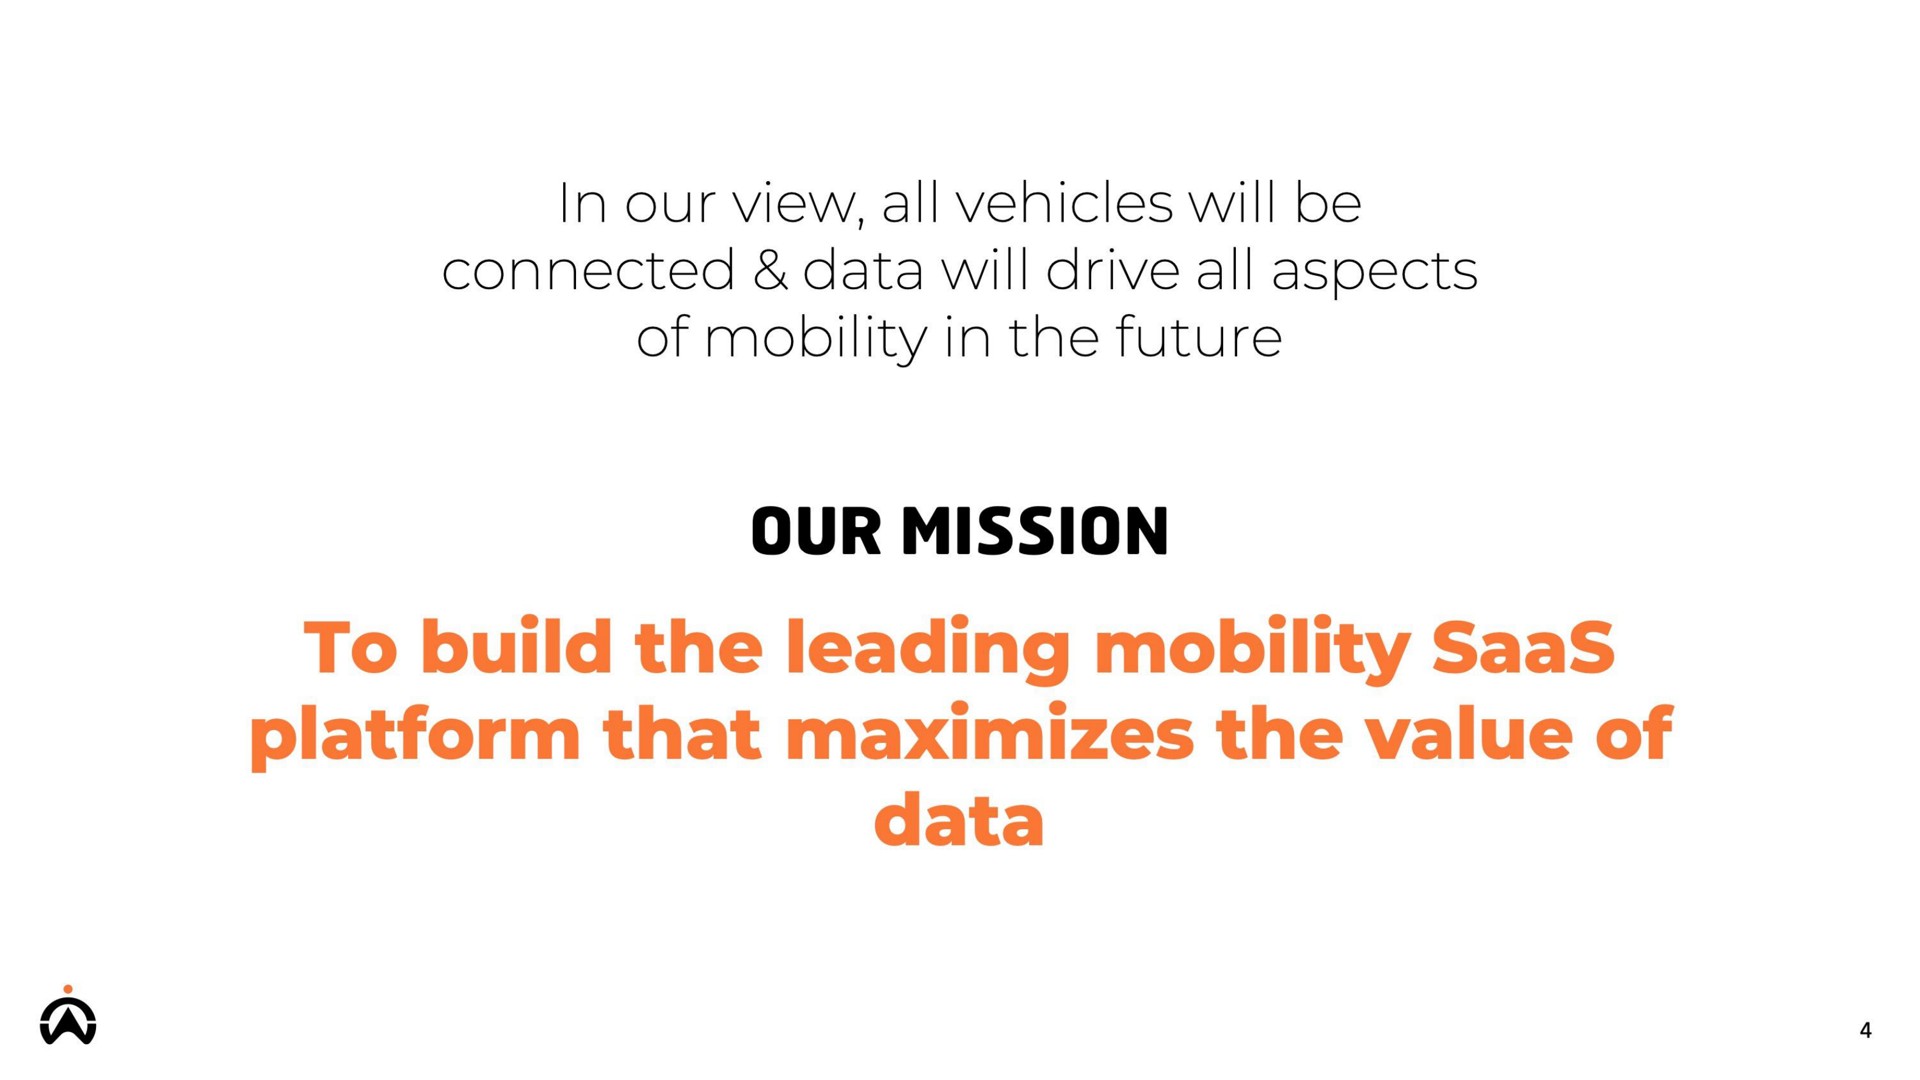 our mission to build the leading mobility platform that maximizes the value of data | Karooooo